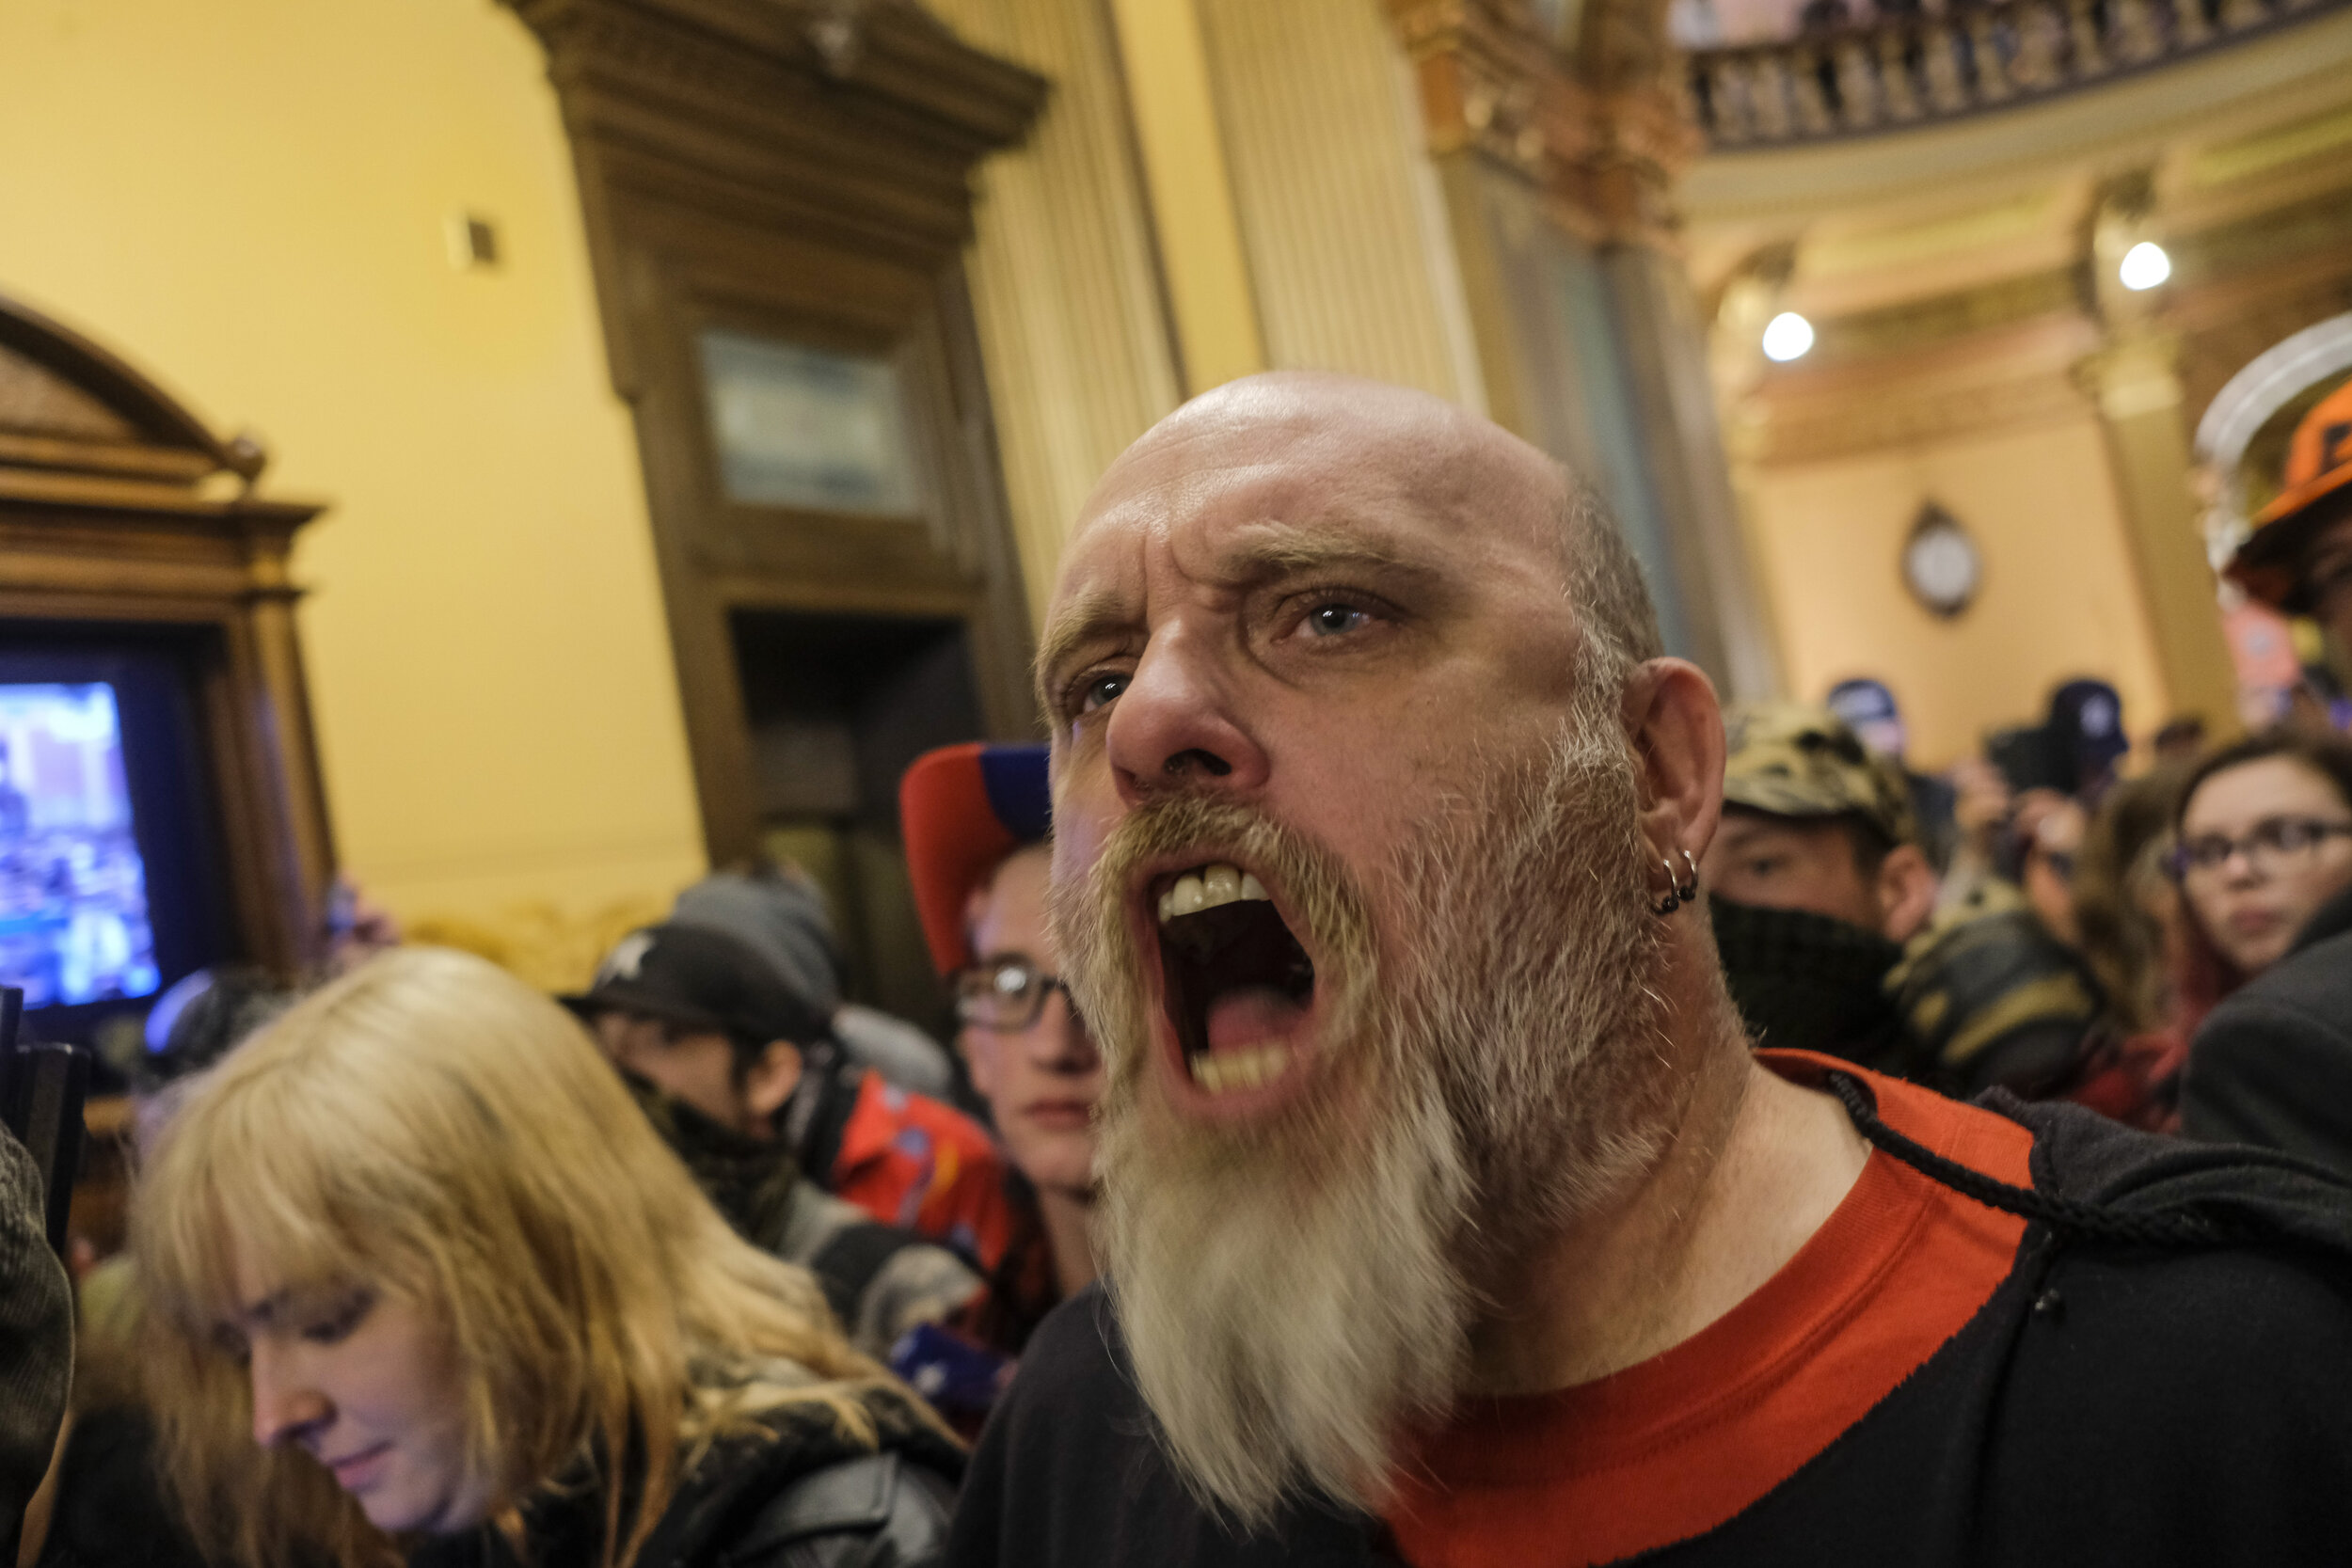  Anti-lockdown protesters, some armed with assault rifles and military grade equipment, chant slogans and deman Michigan re-open outside of the senate chamber at the Michigan Capitol Building in Lansing, Michigan on Thursday, April 30. As the nation’